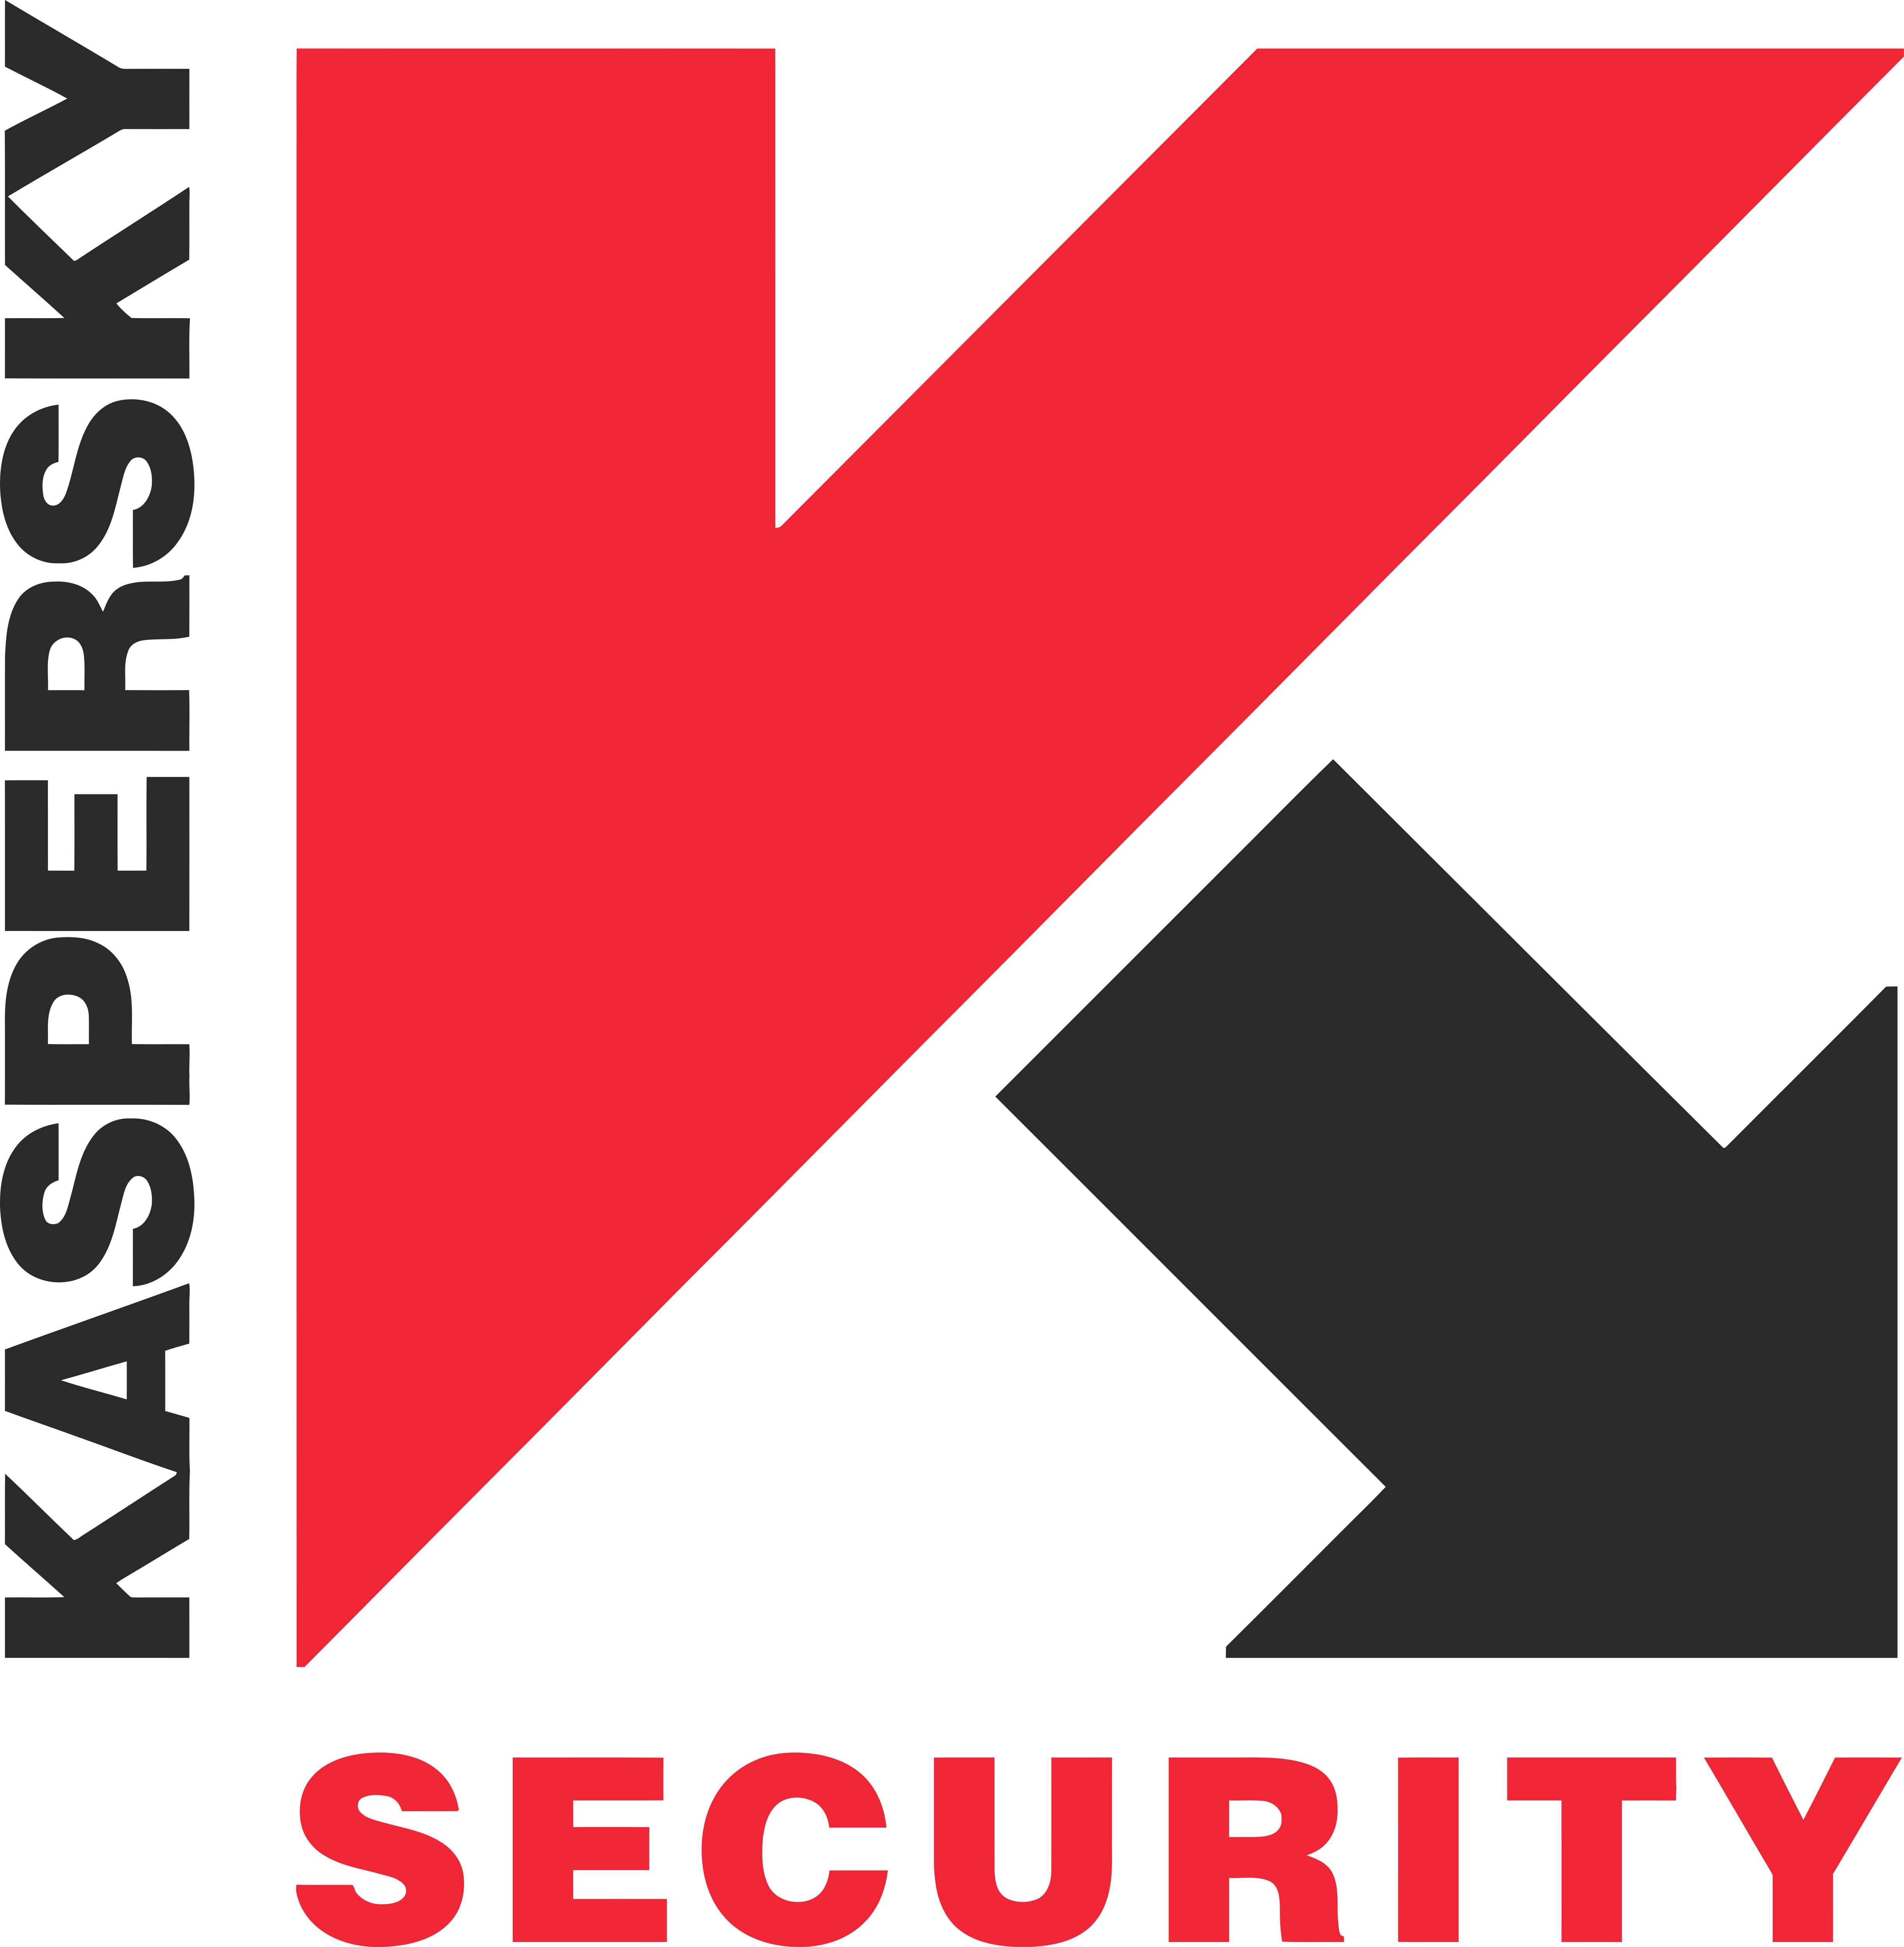 download the new version for windows Kaspersky Virus Removal Tool 20.0.10.0 (05.11.2023)